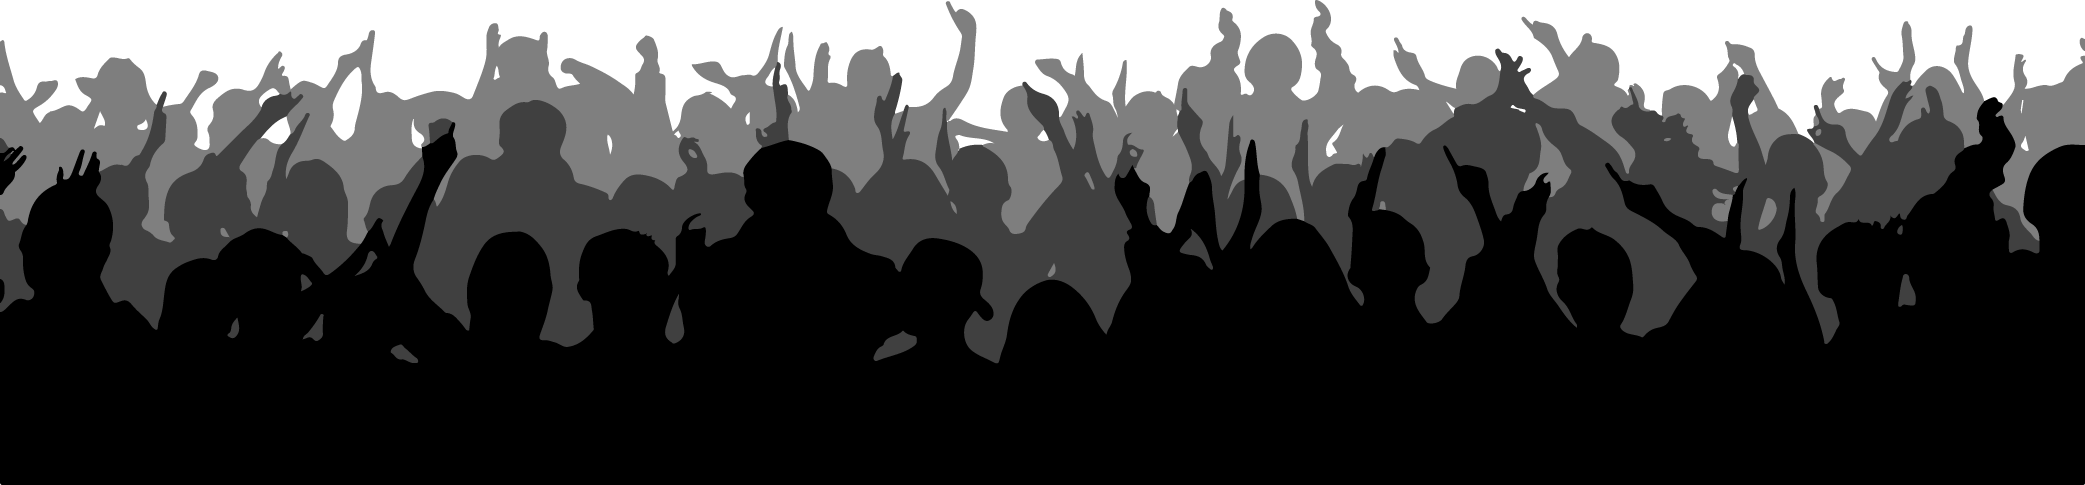 Download Crowd clipart theatre audience, Crowd theatre audience ...